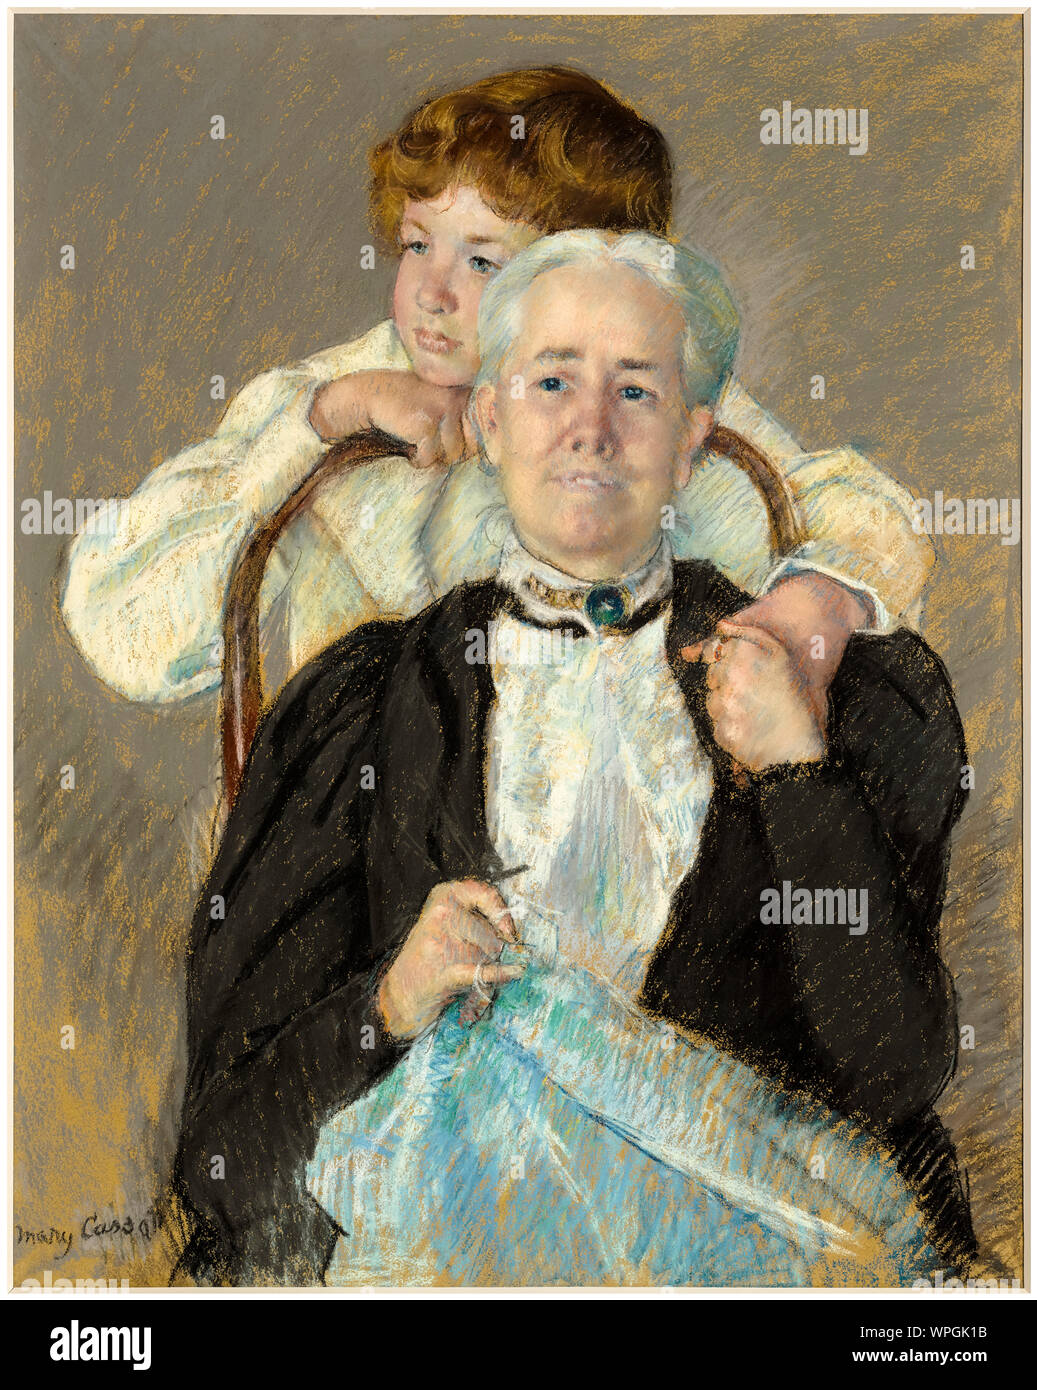 Mary Cassatt, Portrait of Mrs Cyrus J Lawrence with her grandson R Lawrence Oakley, pastel drawing, circa 1898 Stock Photo